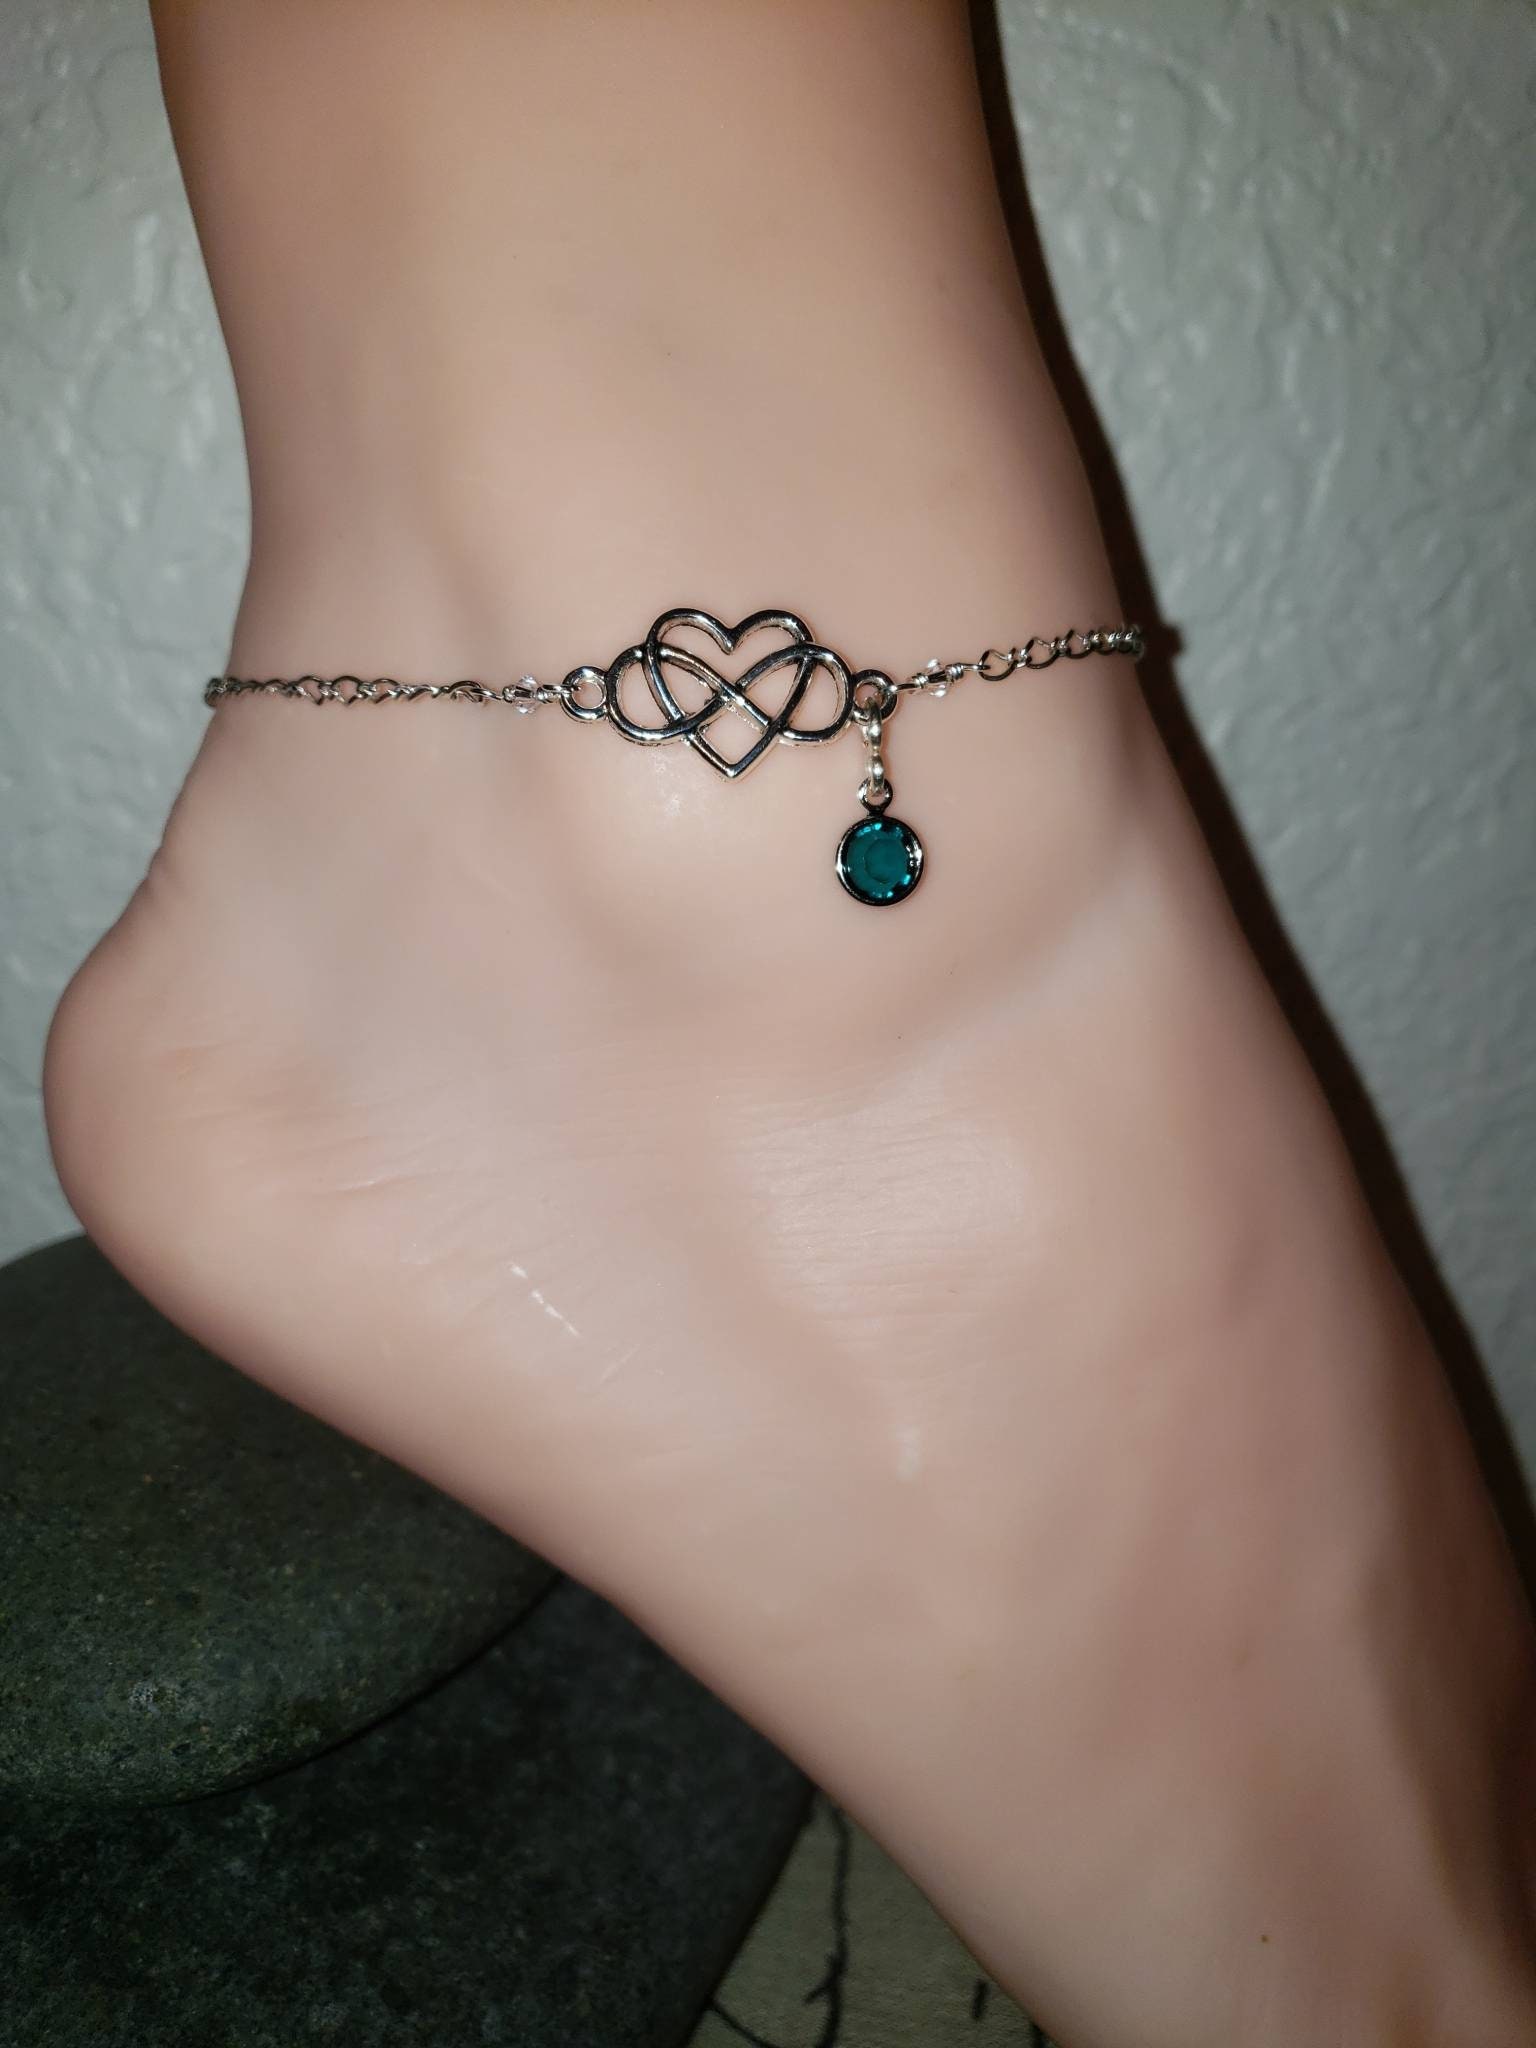 Infinity Heart Anklet, Polyamory Anklet, Stainless Steel Chain, Hotwife  Anklet, Everyday Anklet, Kinky Anklet, Sexy Anklets, Swinger Jewelry - Etsy